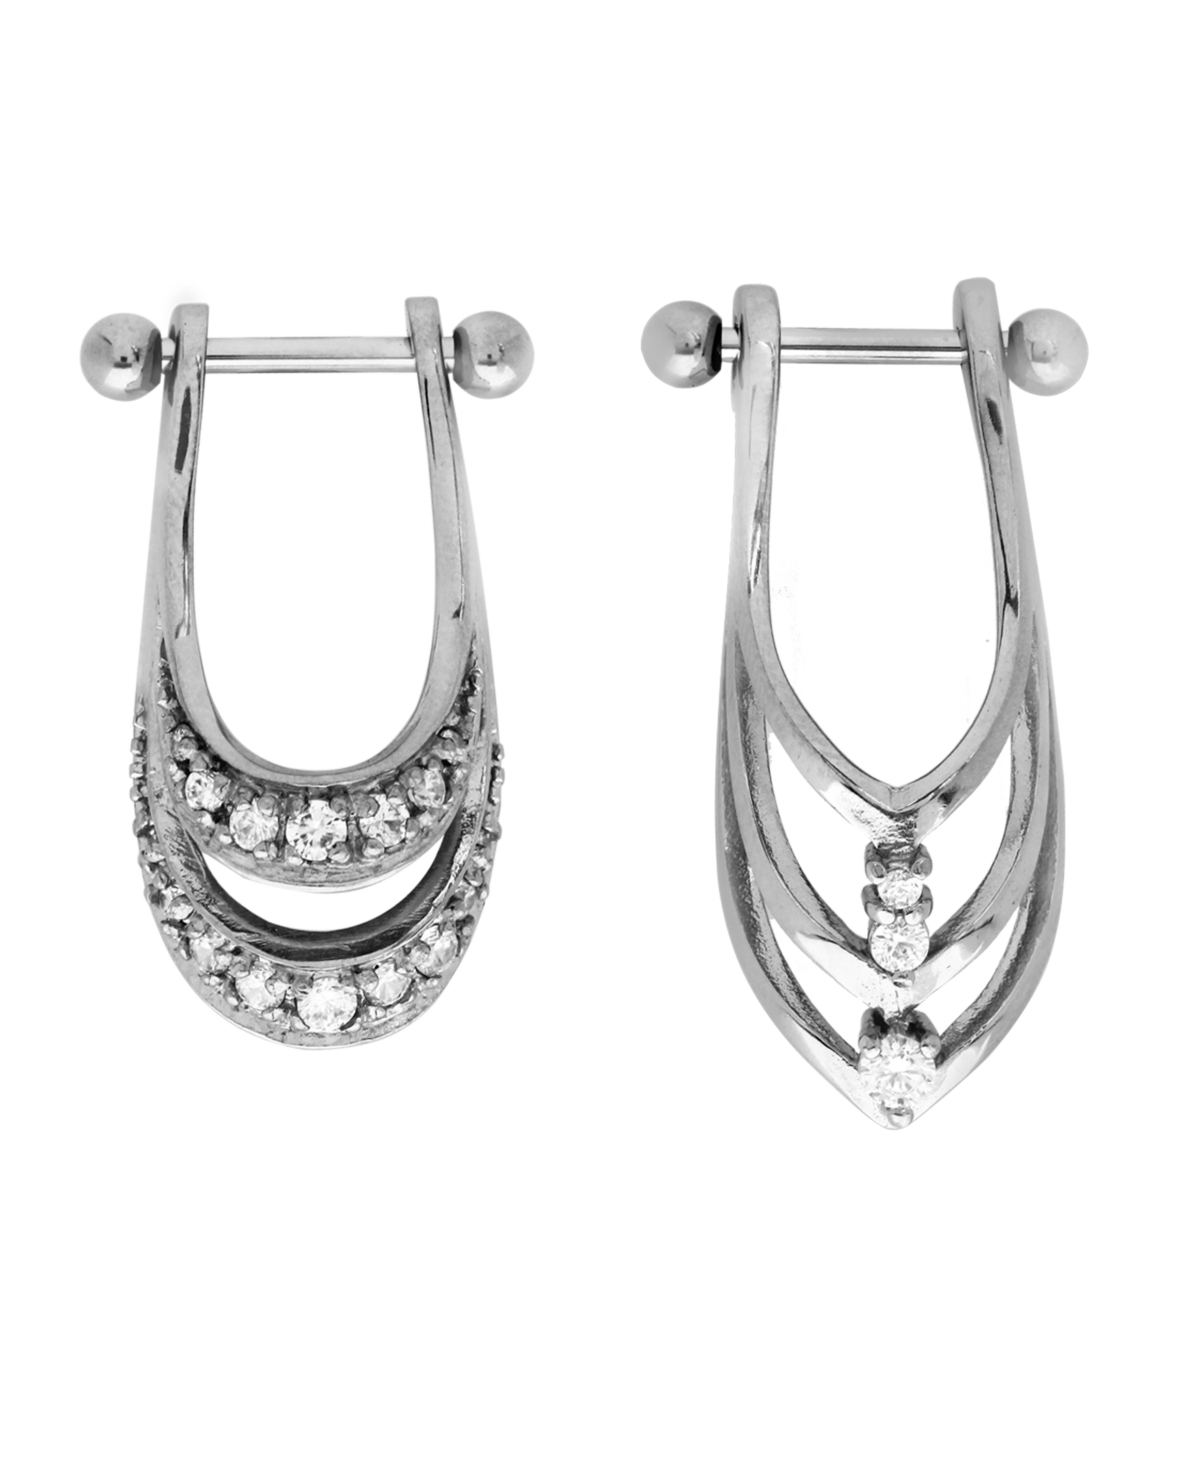 Bodifine Stainless Steel Set of 2 Crystal Shield Helix Bars - Silver